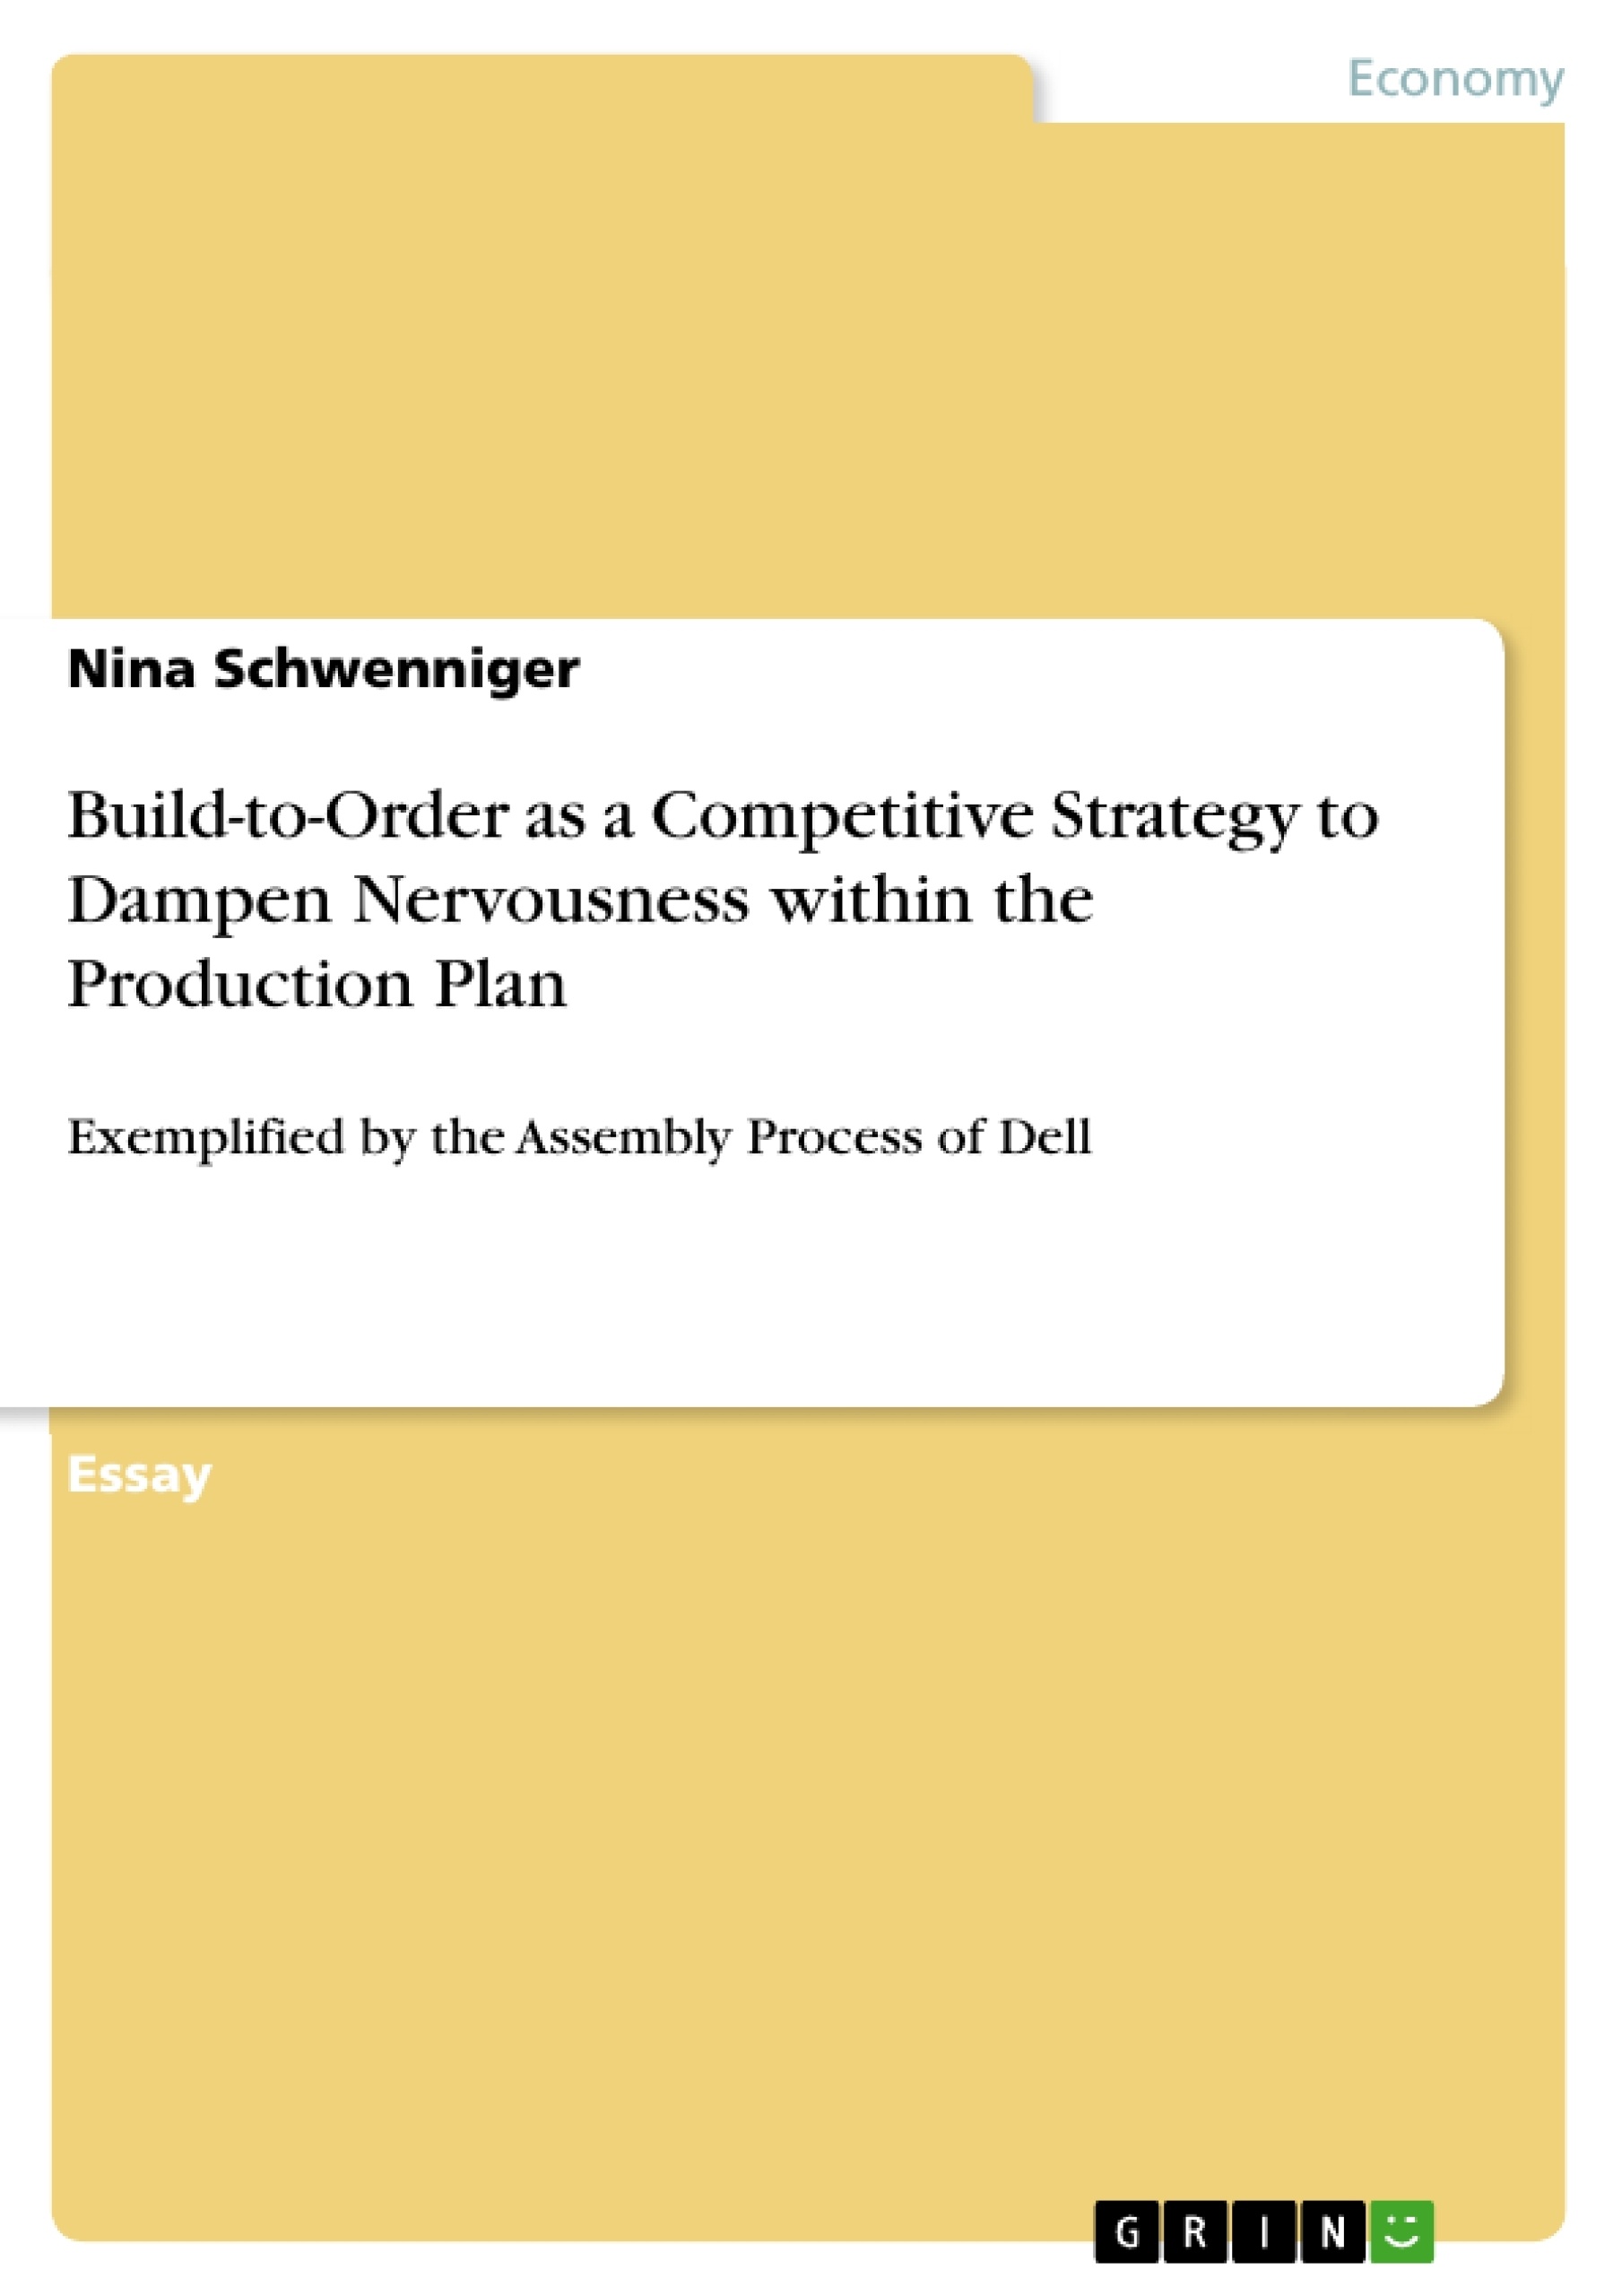 Title: Build-to-Order as a Competitive Strategy to Dampen Nervousness within the Production Plan